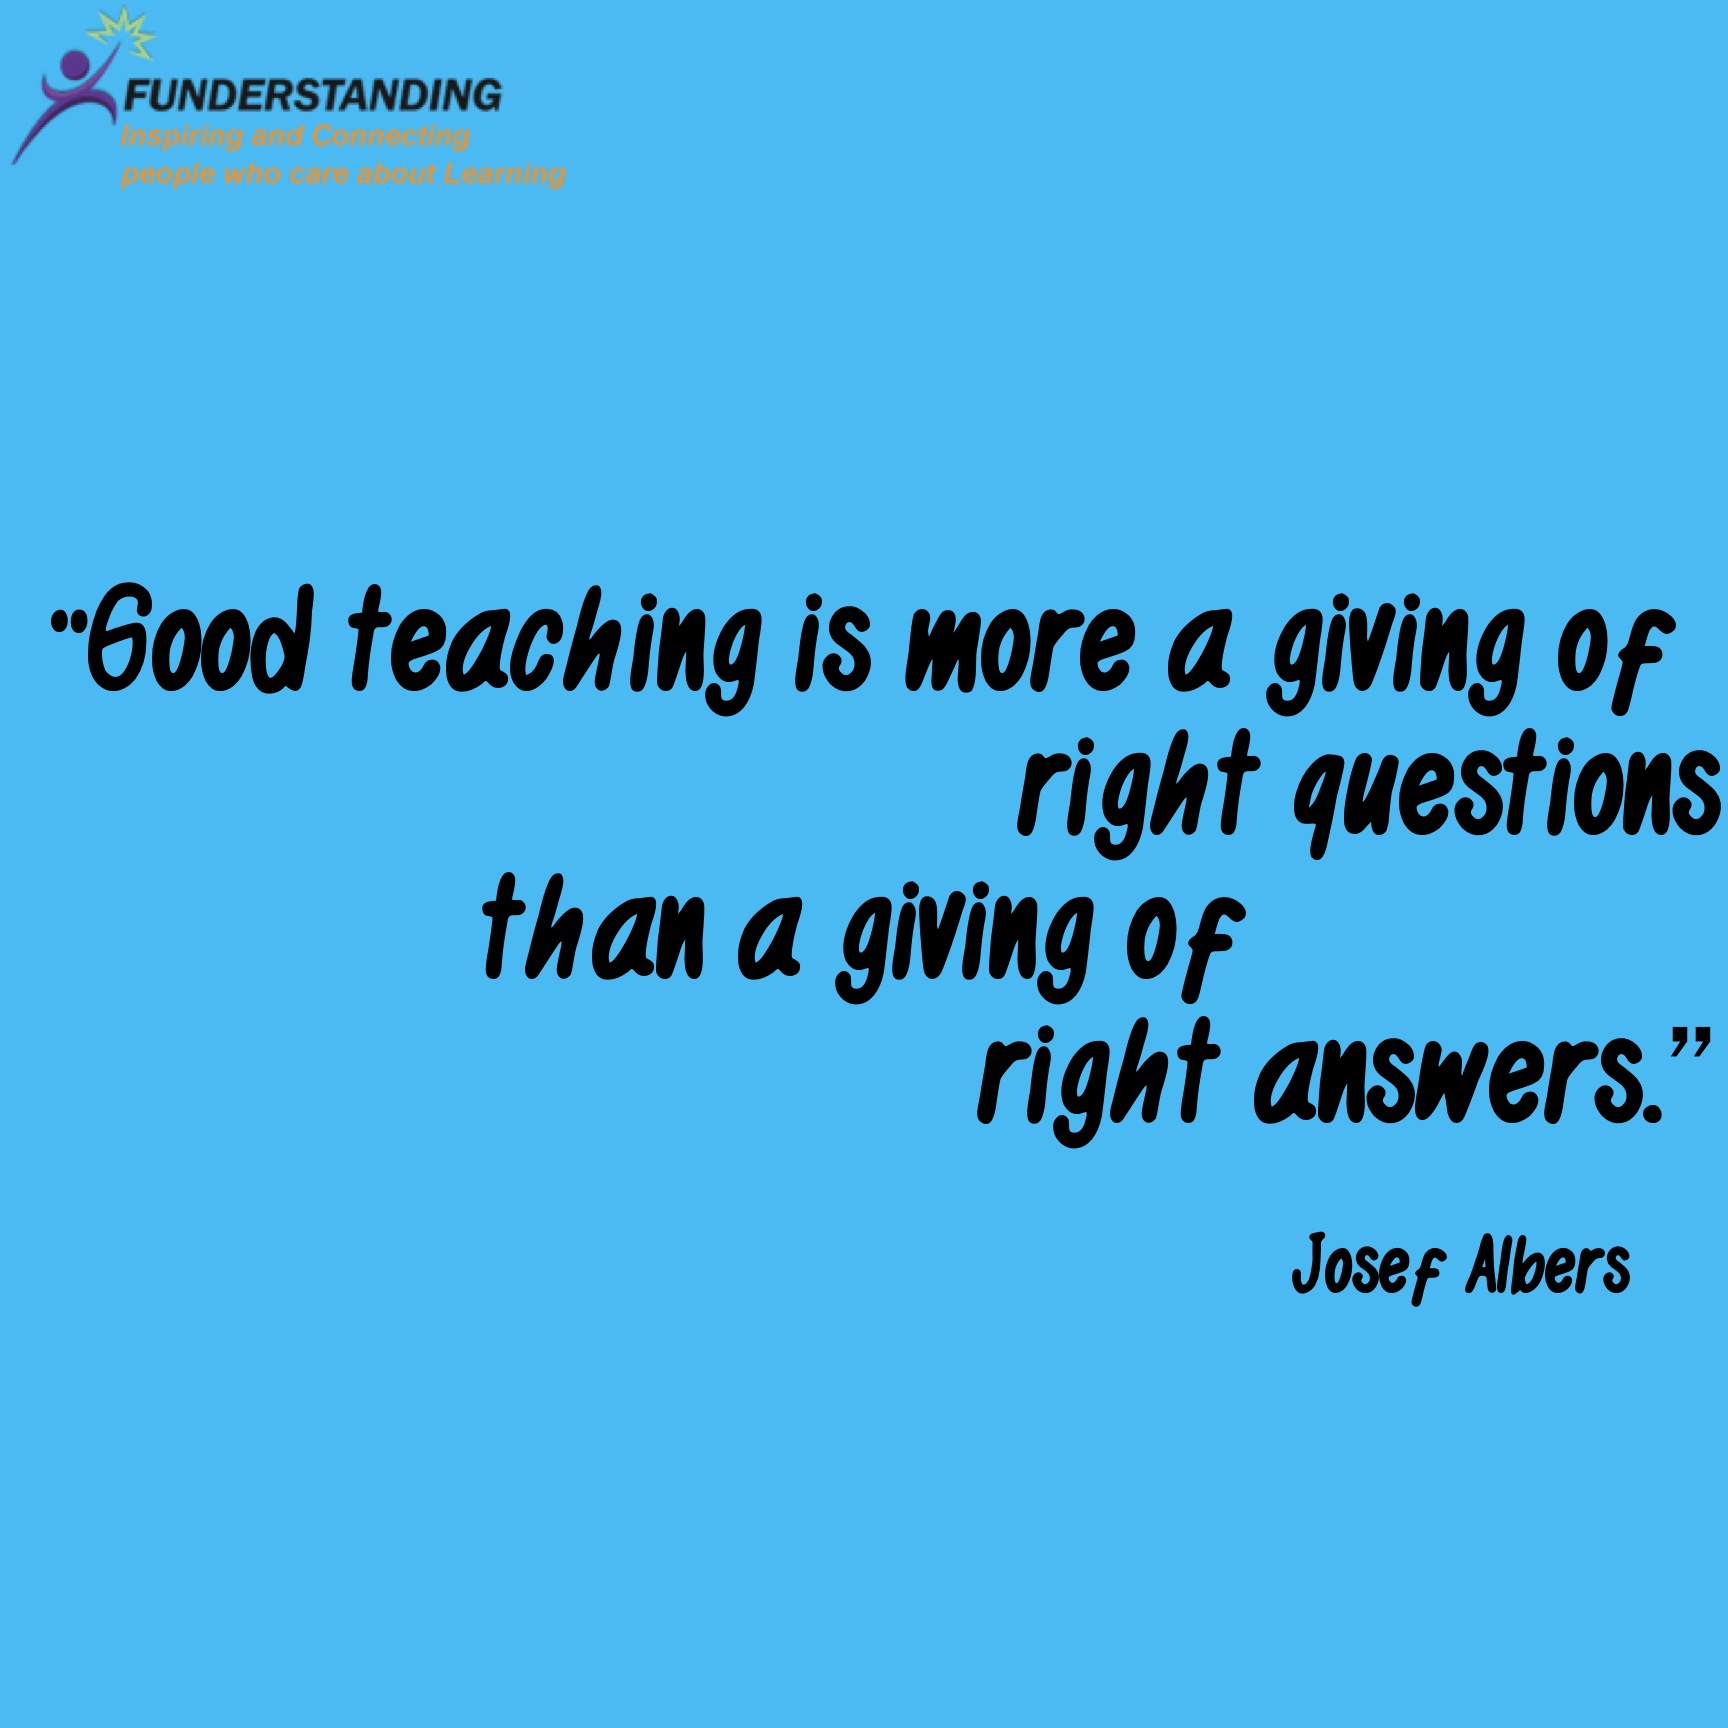 Educational Quotes | Funderstanding: Education, Curriculum and Learning